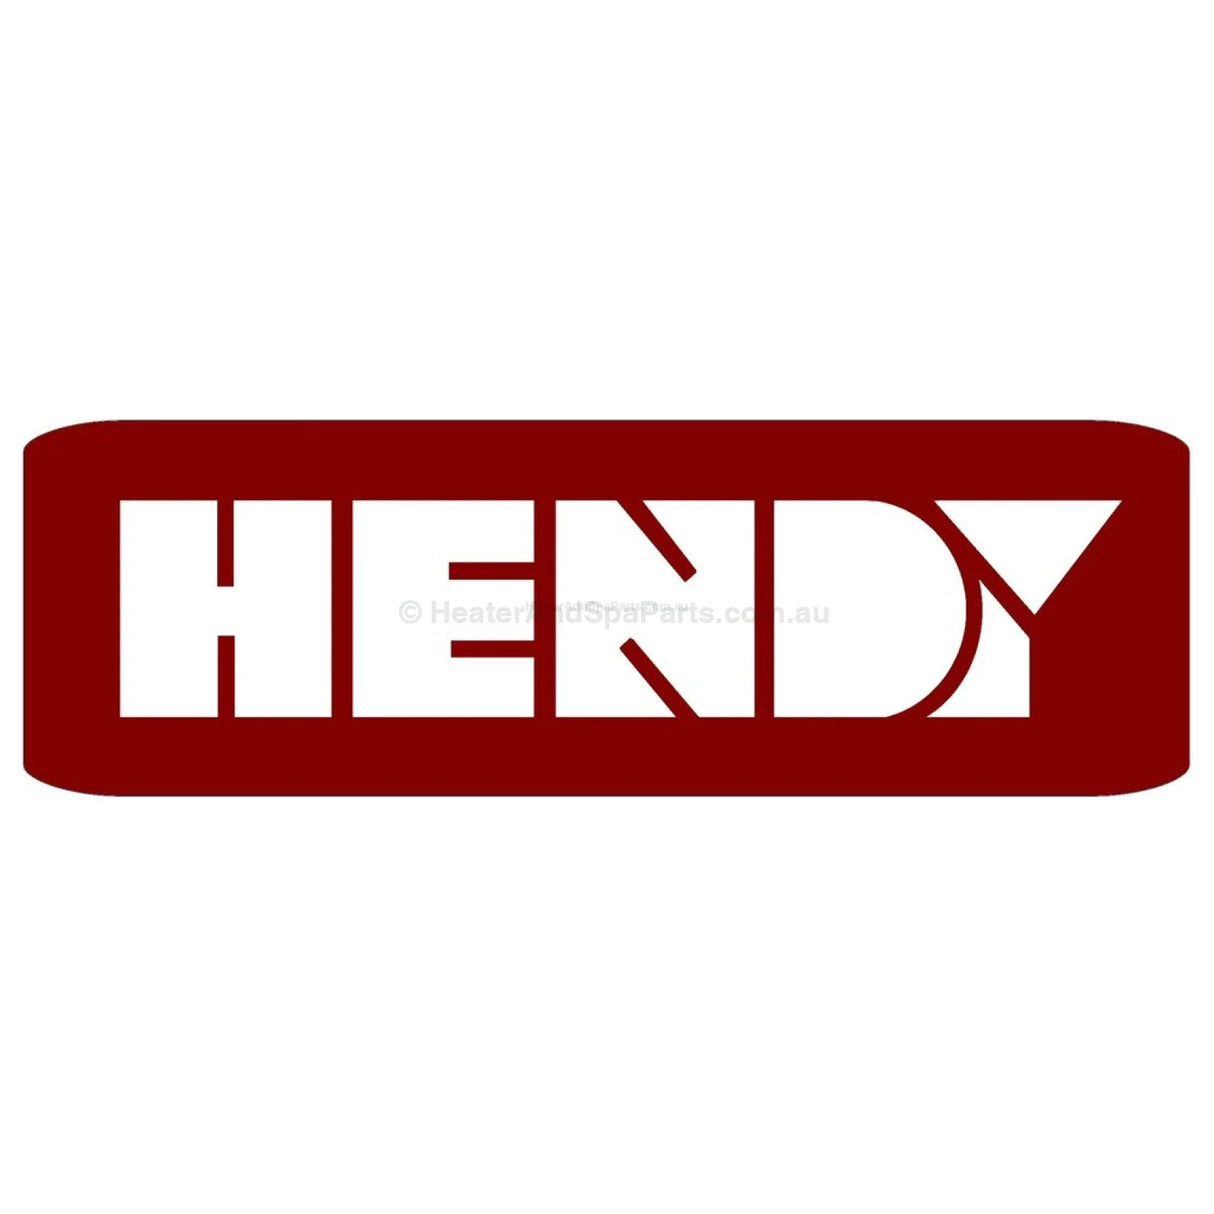 Hendy / Hurlcon Hydronic Spare Replacement Parts - Boilers - Heater and Spa Parts